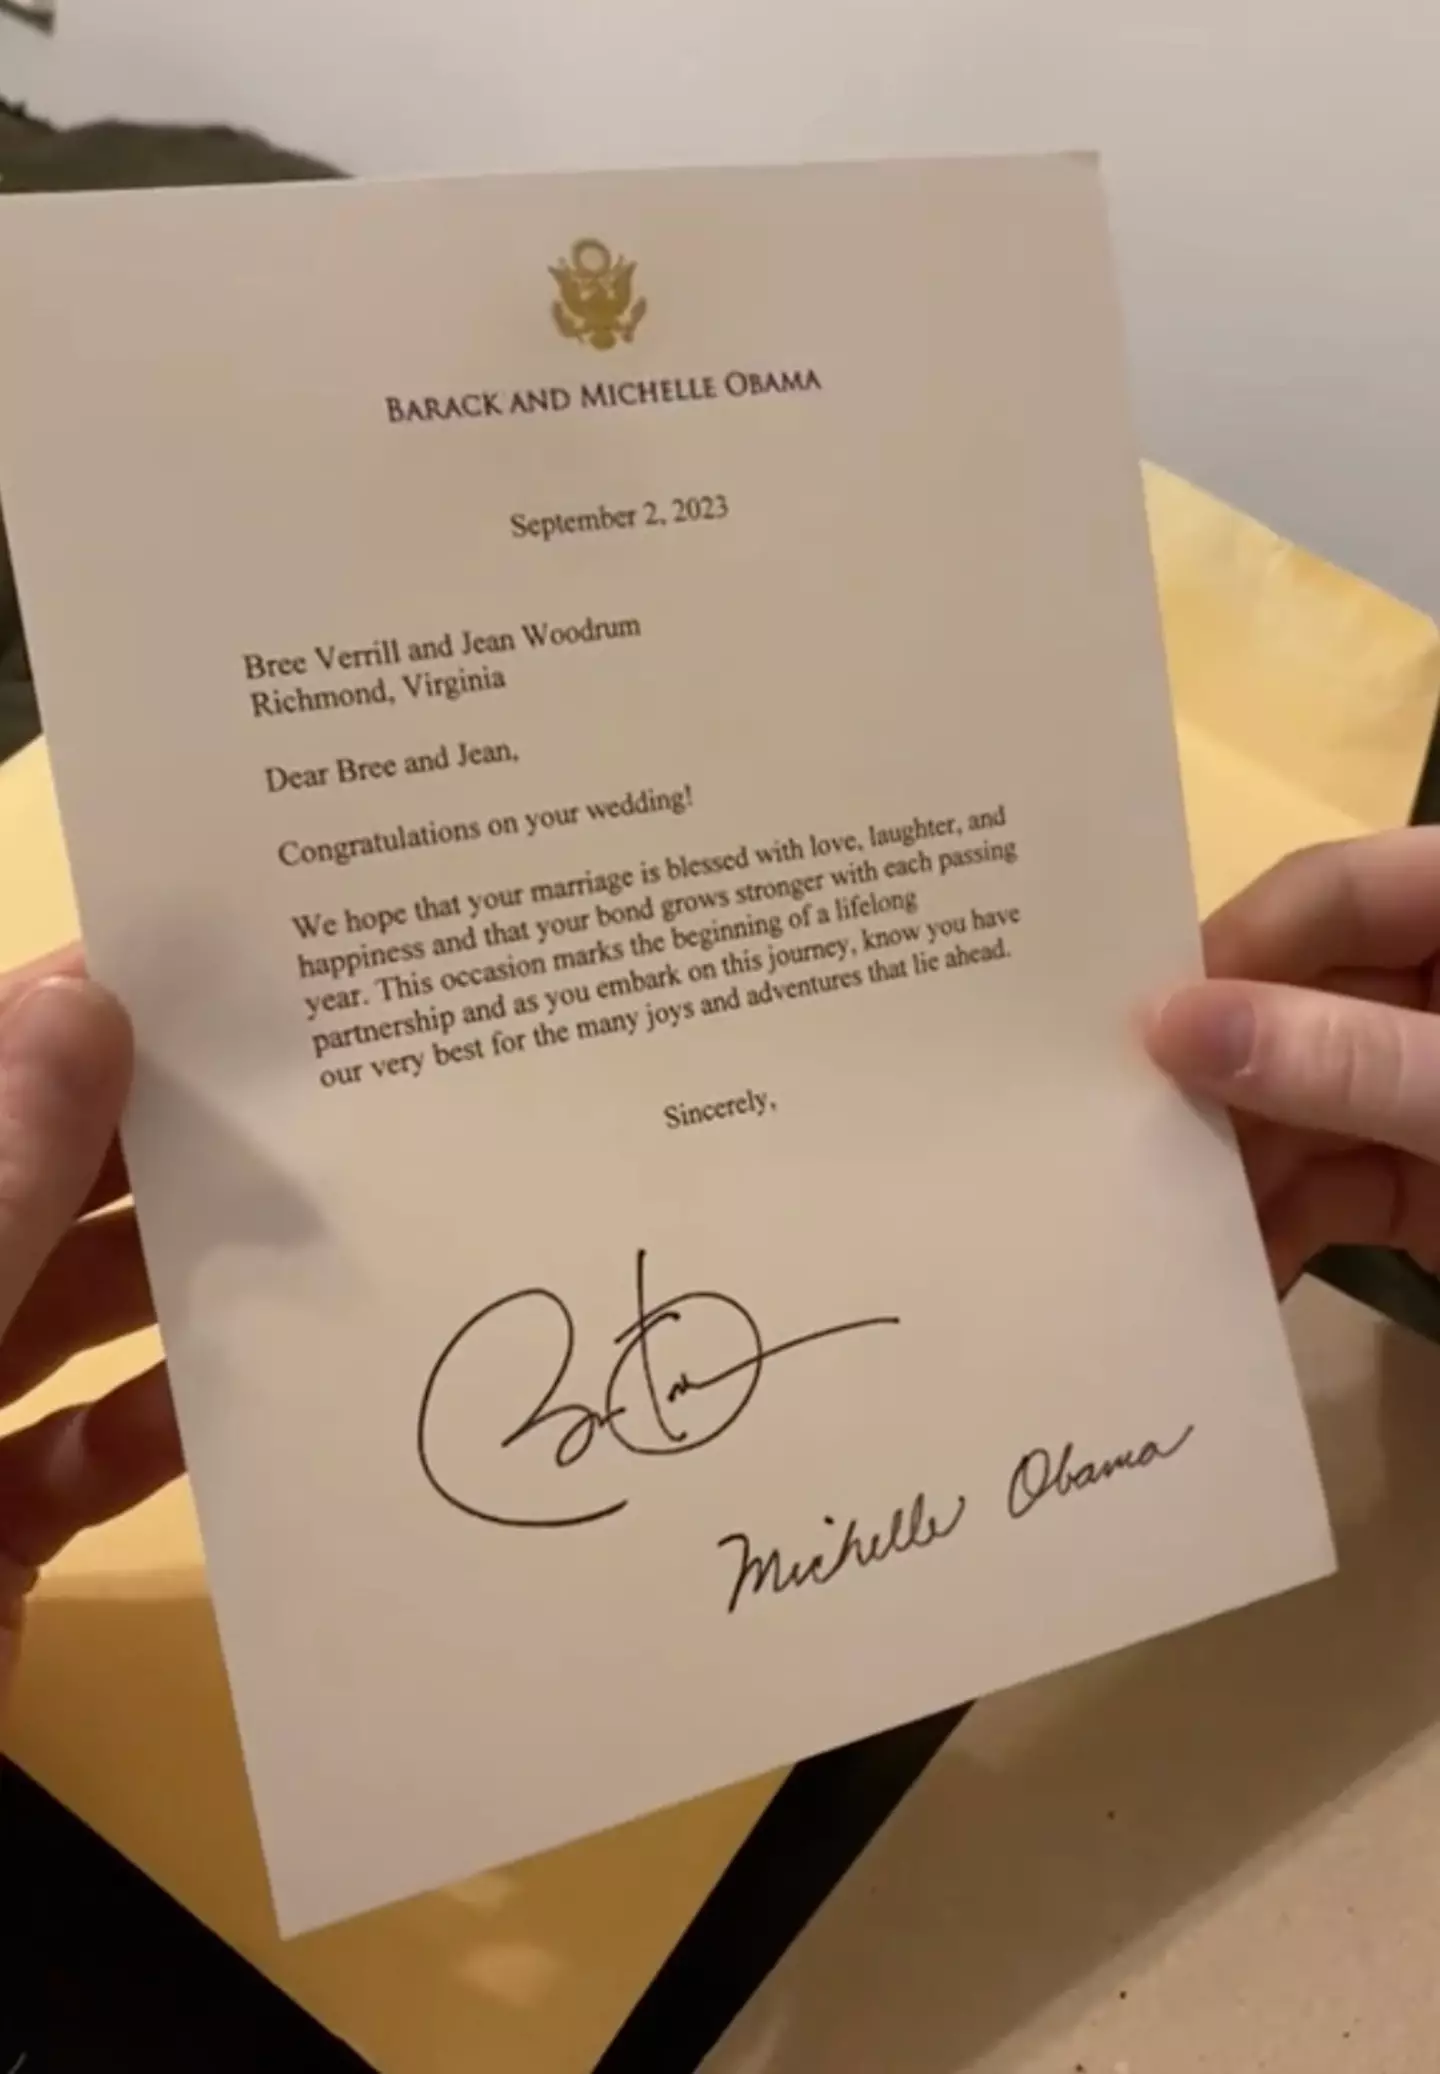 The Obamas sent the newlyweds a letter wishing them all the best.